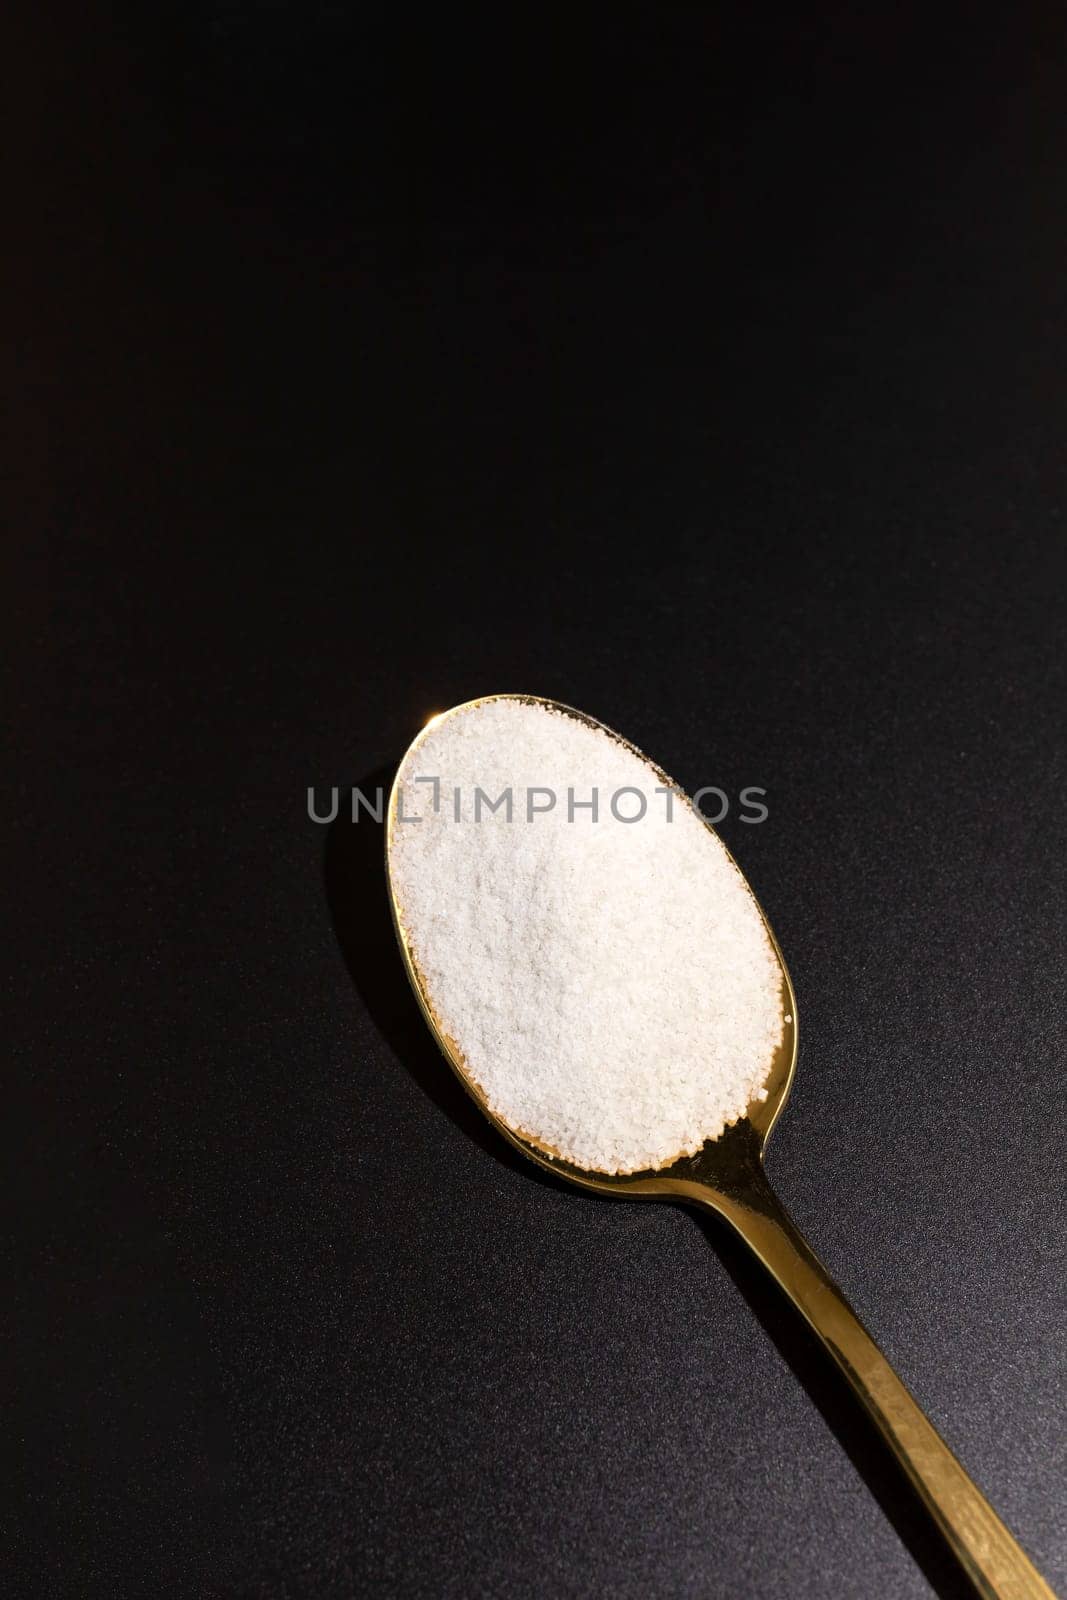 Design Celtic Gray Sea Salt In Golden Spoon on Dark Table, Vertical Plane. Copy Space. Natural, Unrefined Salt Harvested From Brittany, France. Natural Mineral And Trace Elements, Superfood. Seasoning by netatsi